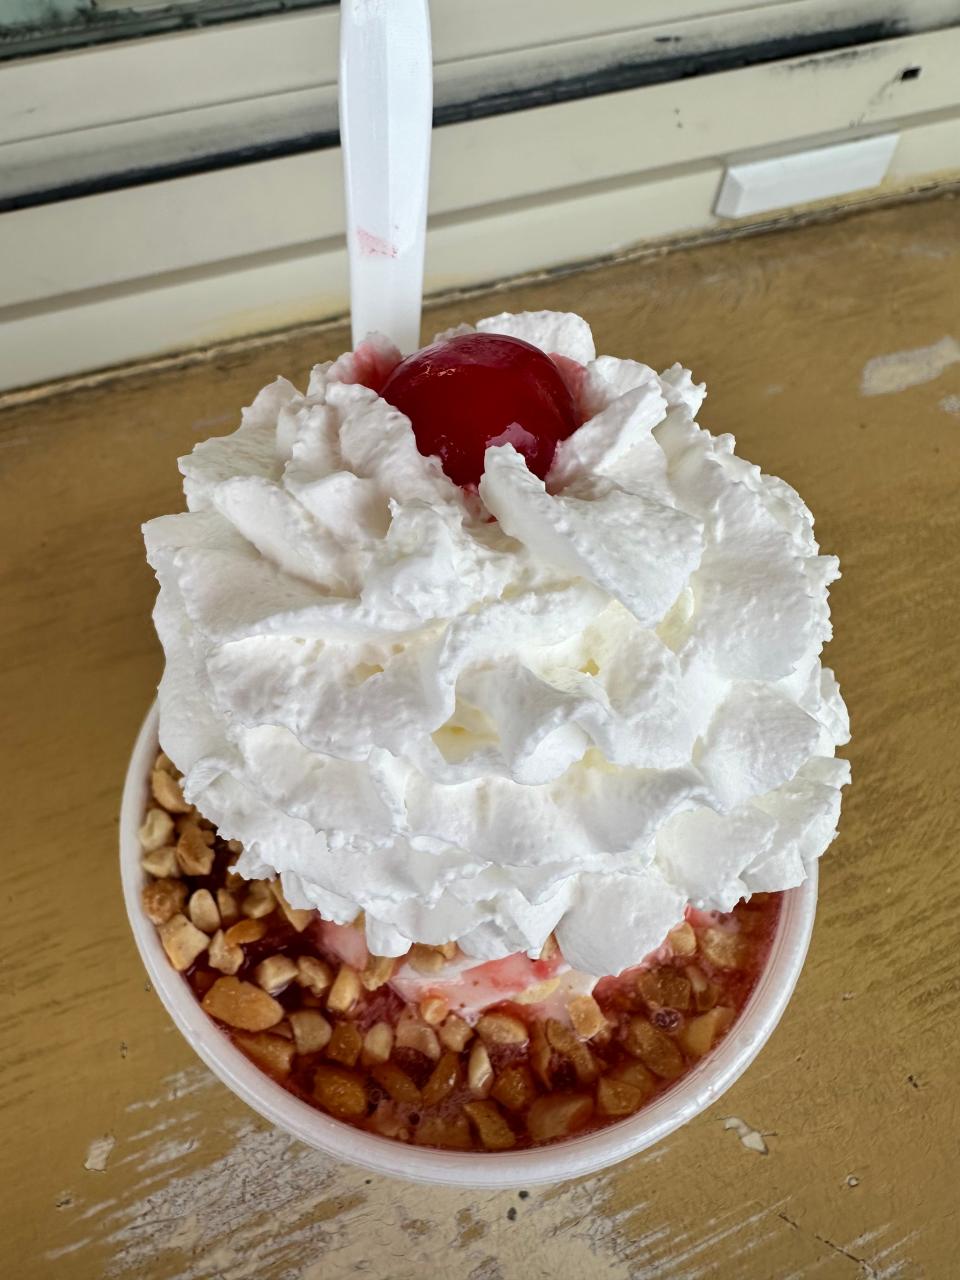 A classic strawberry sundae with chopped nuts and whipped cream served at Twistee Treats in Massillon. All with a cherry on top!